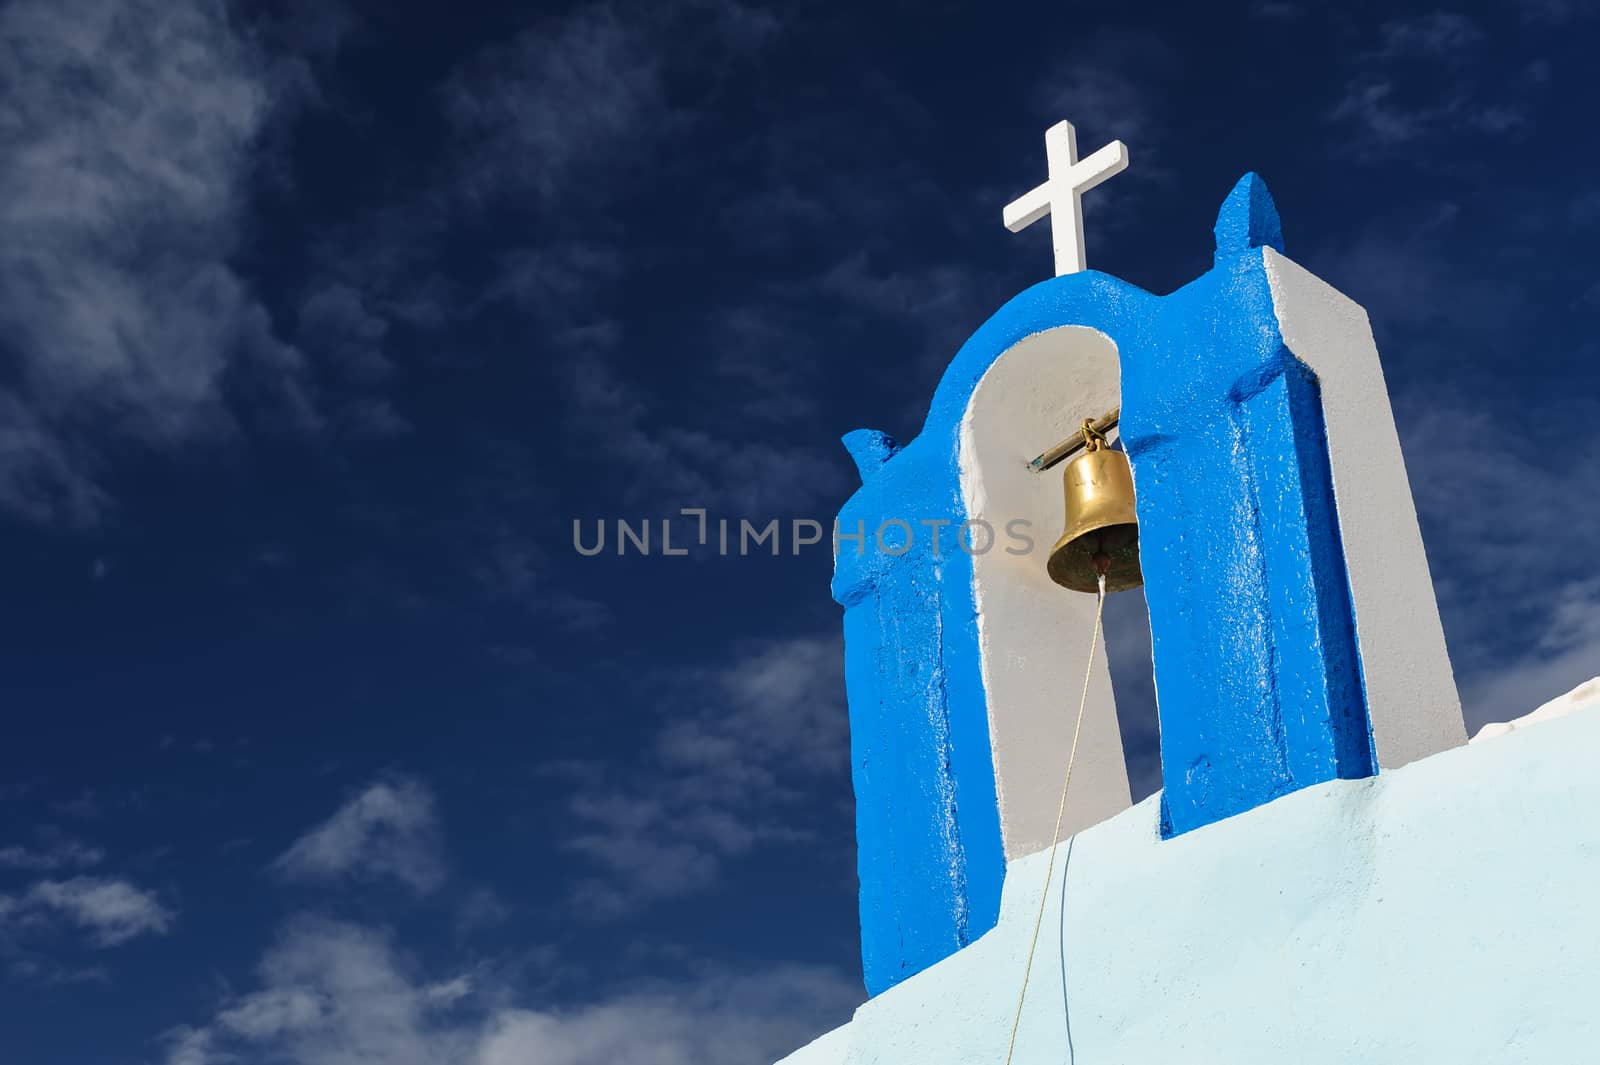 Bell tower in Oia, Santorini by starush